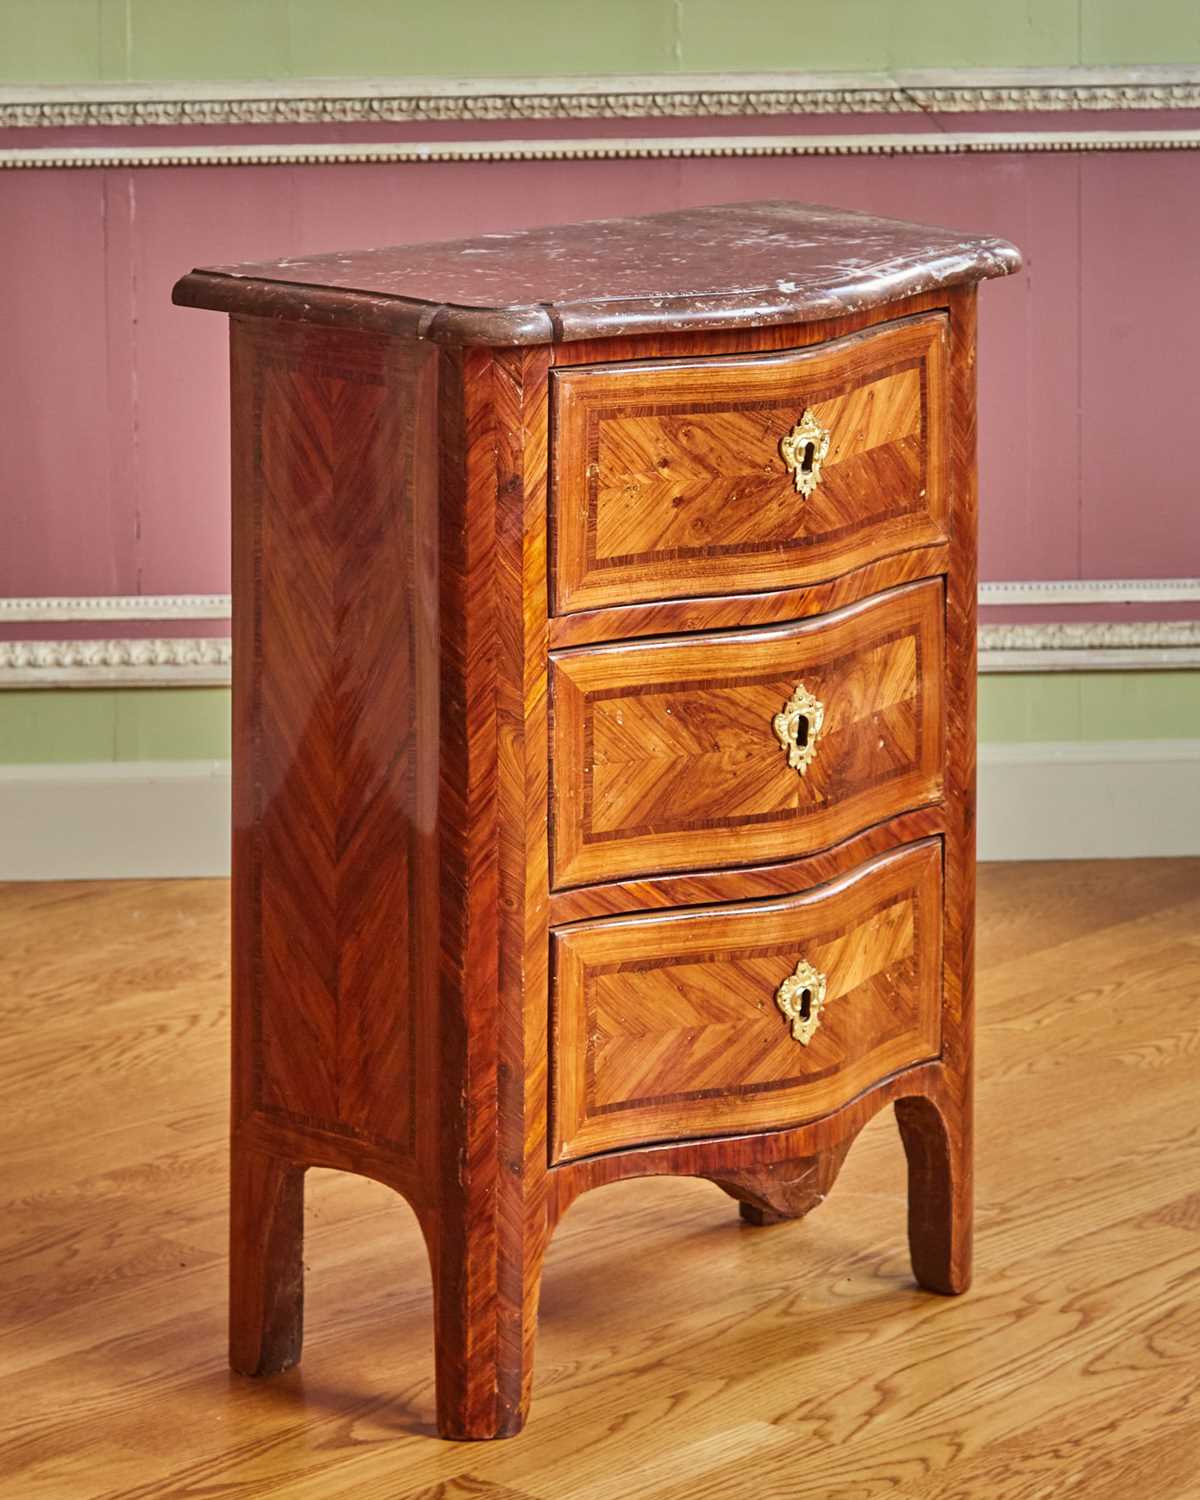 Lot 366 - Régence Kingwood and Tulipwood Chest of Drawers